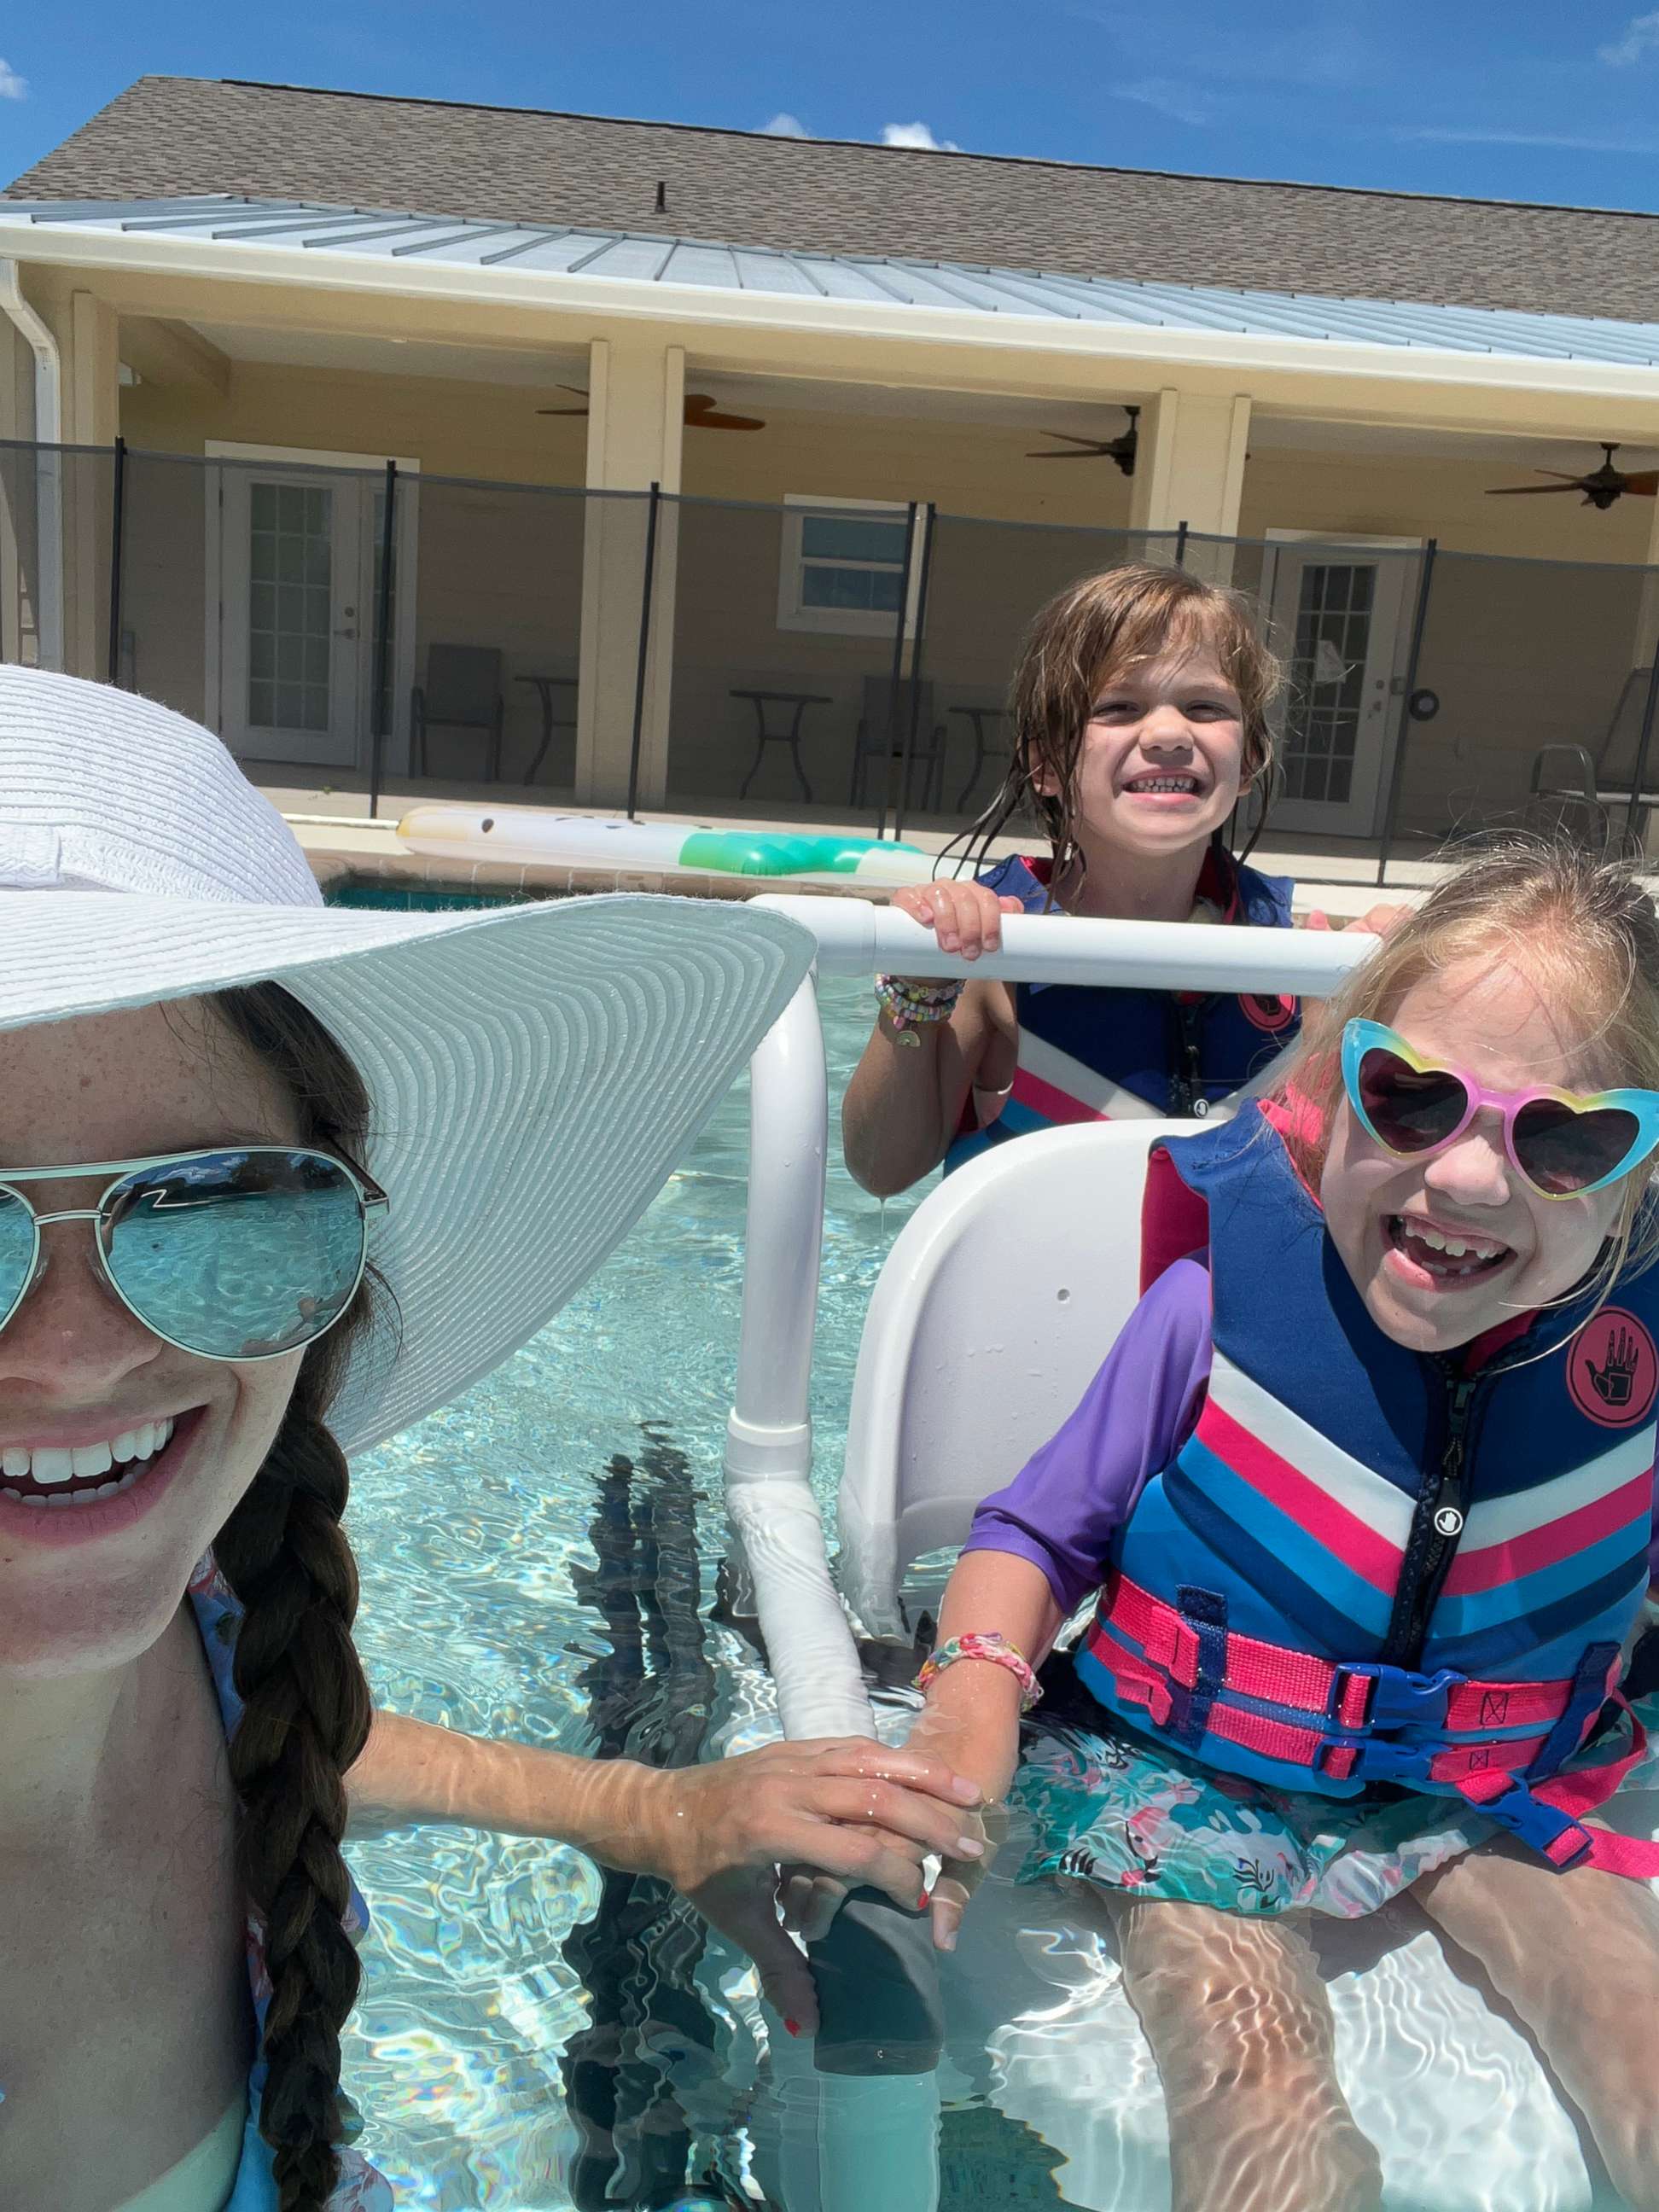 PHOTO: Dallas, her mom, Katrina Placzek, and sister Brooklyn enjoy an accessible swimming pool at Tiff's Place, an accessible vacation home in Florida.
